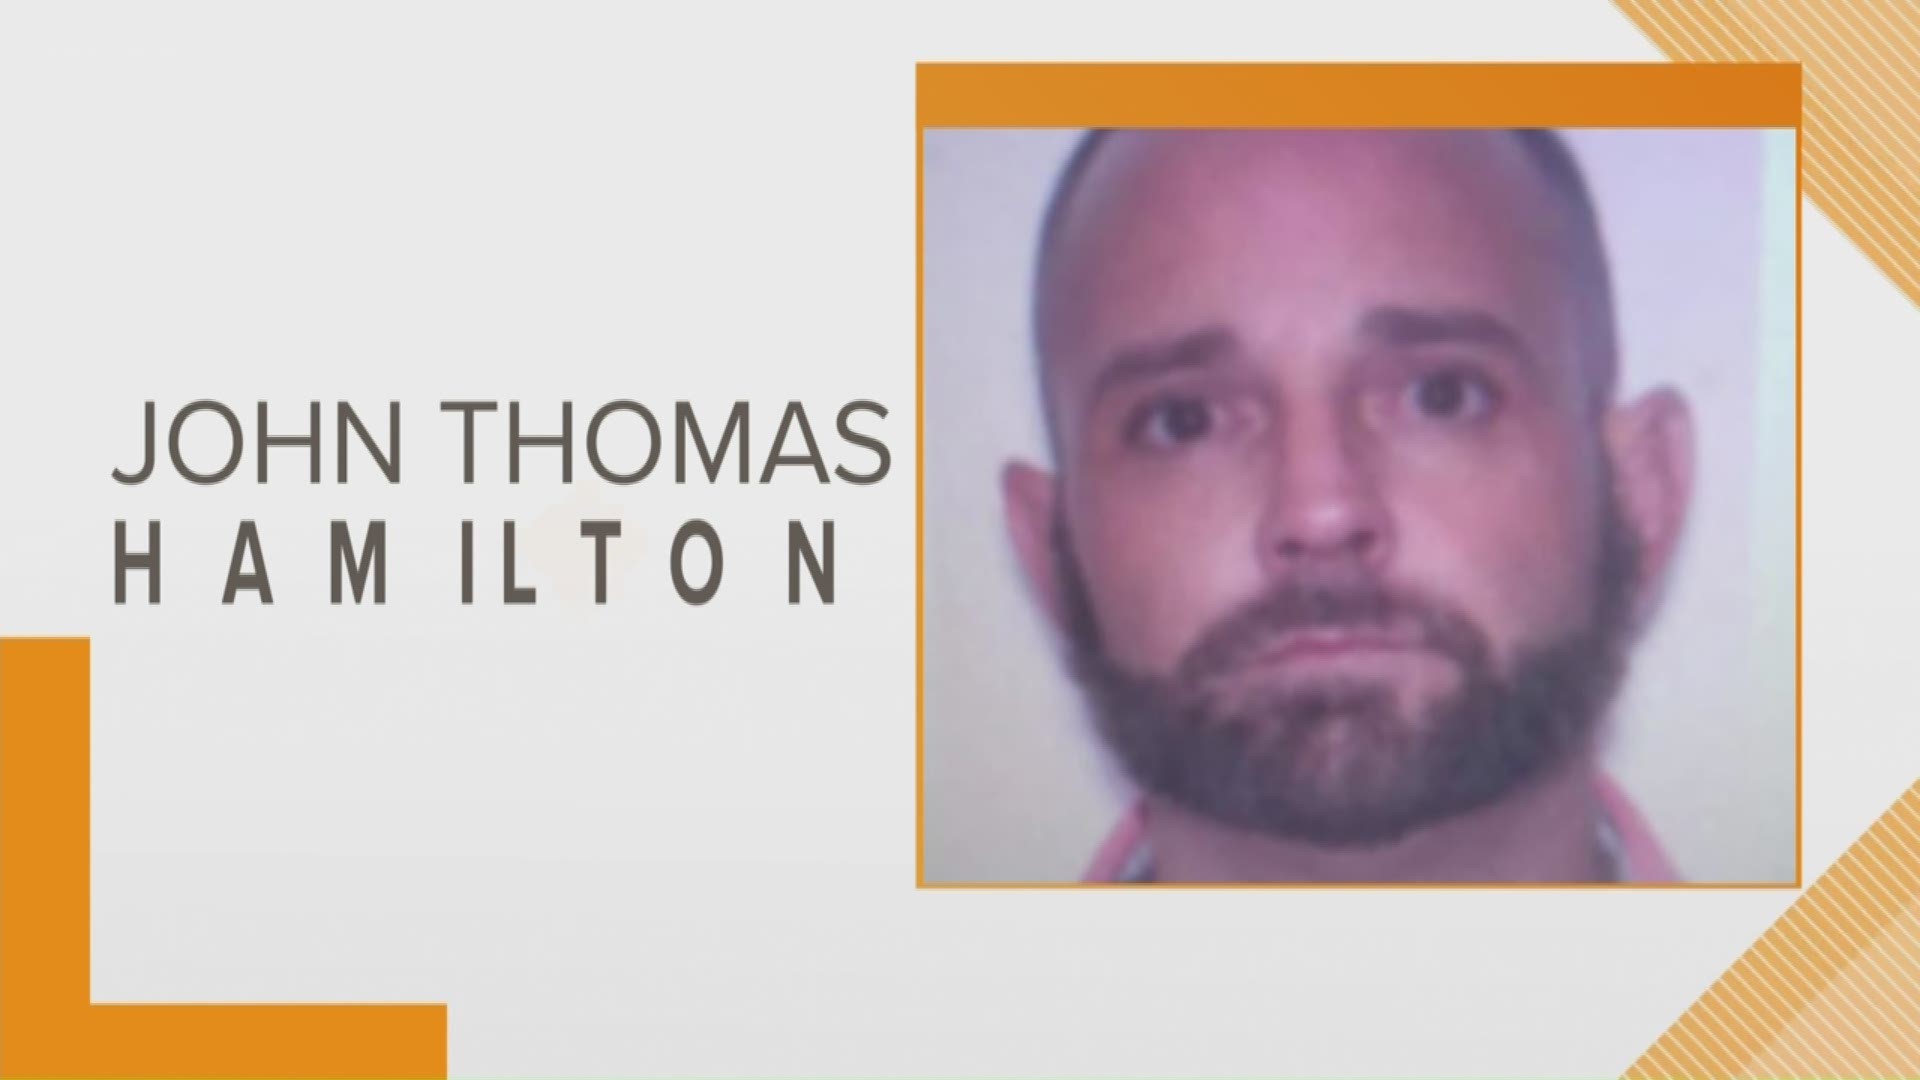 Folly Beach police are searching for 36-year-old John Thomas Hamilton. Anyone with information is asked to call Crimestoppers at 1-888-CRIME-SC.